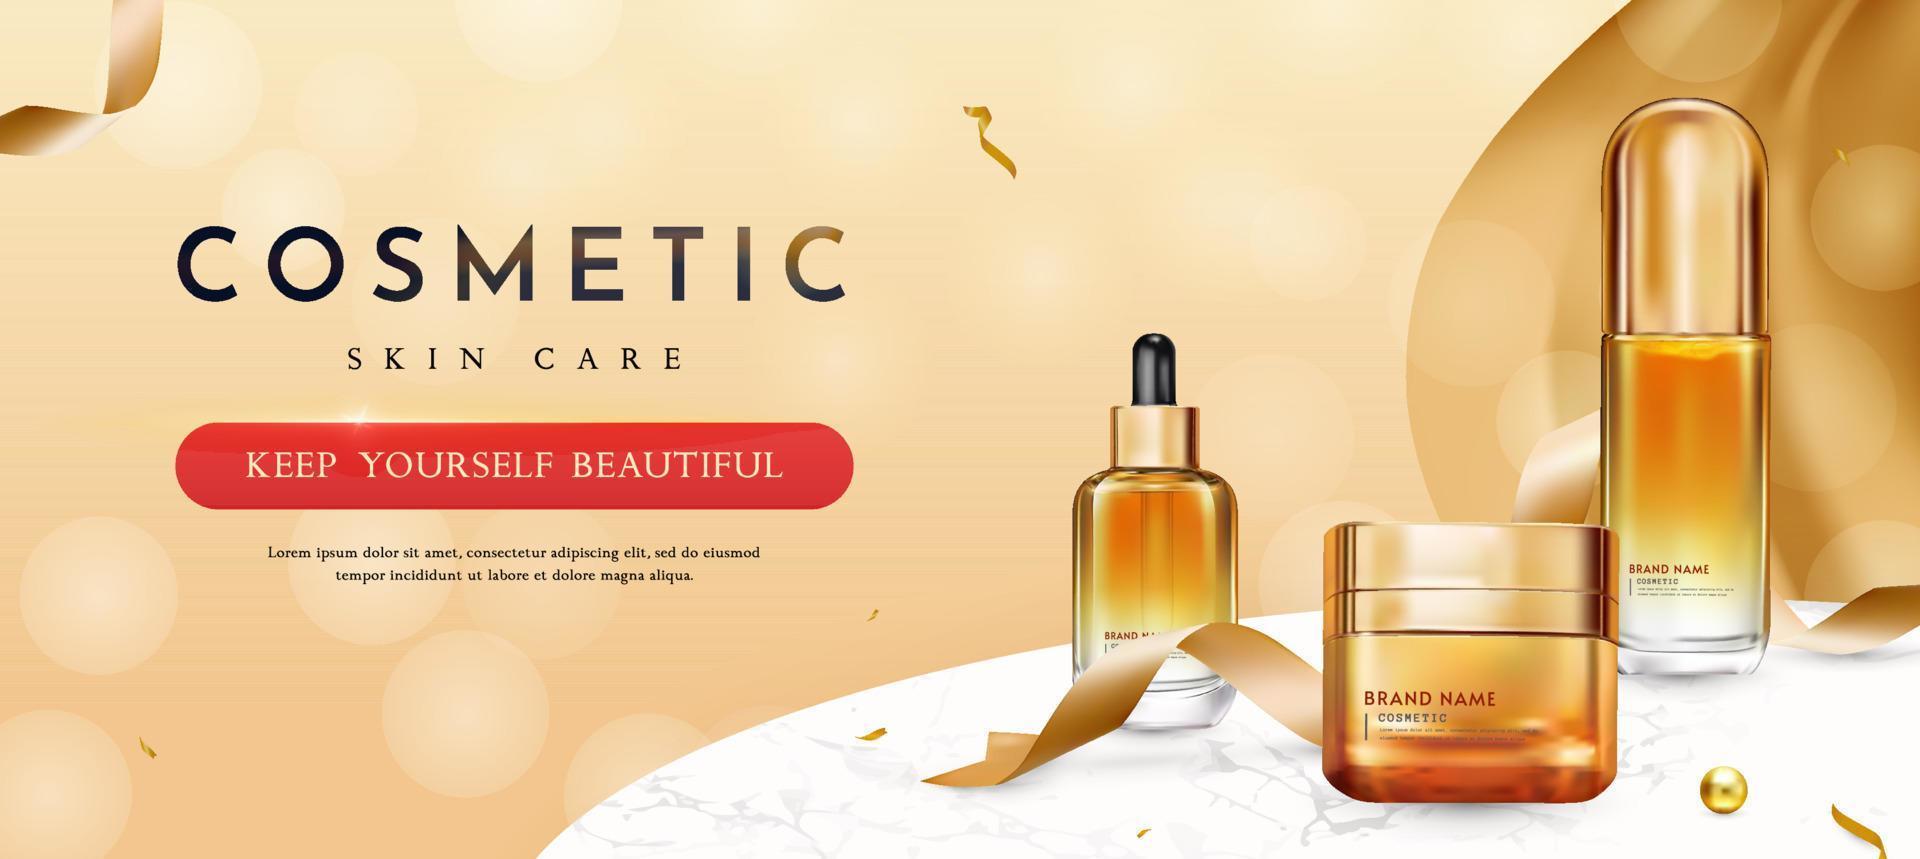 Set of Luxury Cosmetic Products for Skin Care vector